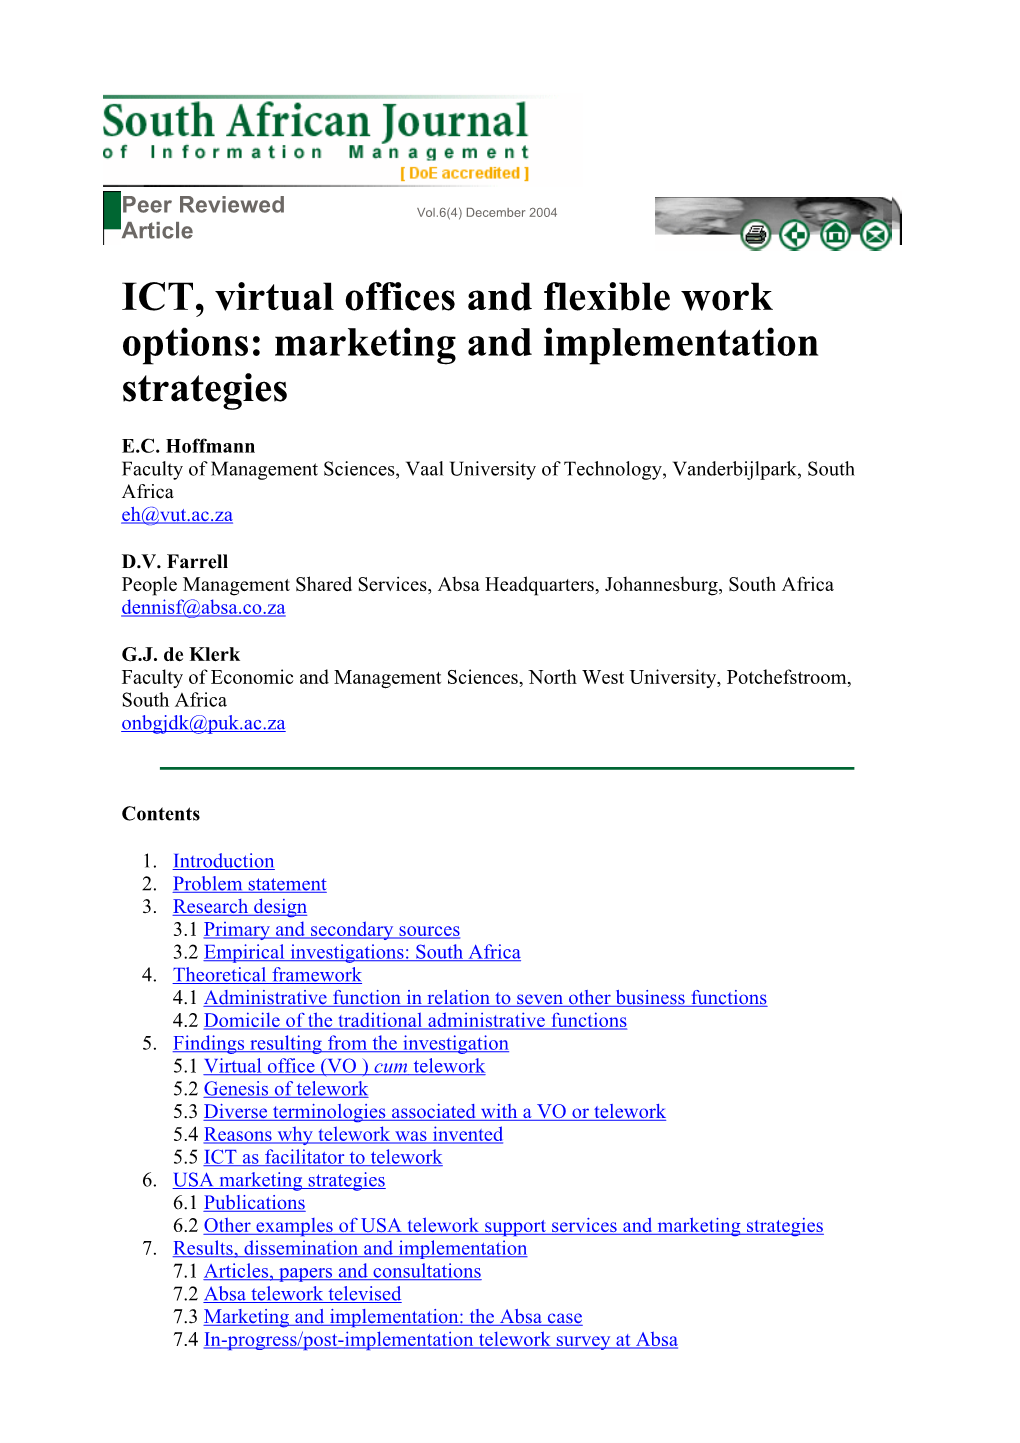 ICT, Virtual Offices and Flexible Work Options: Marketing and Implementation Strategies